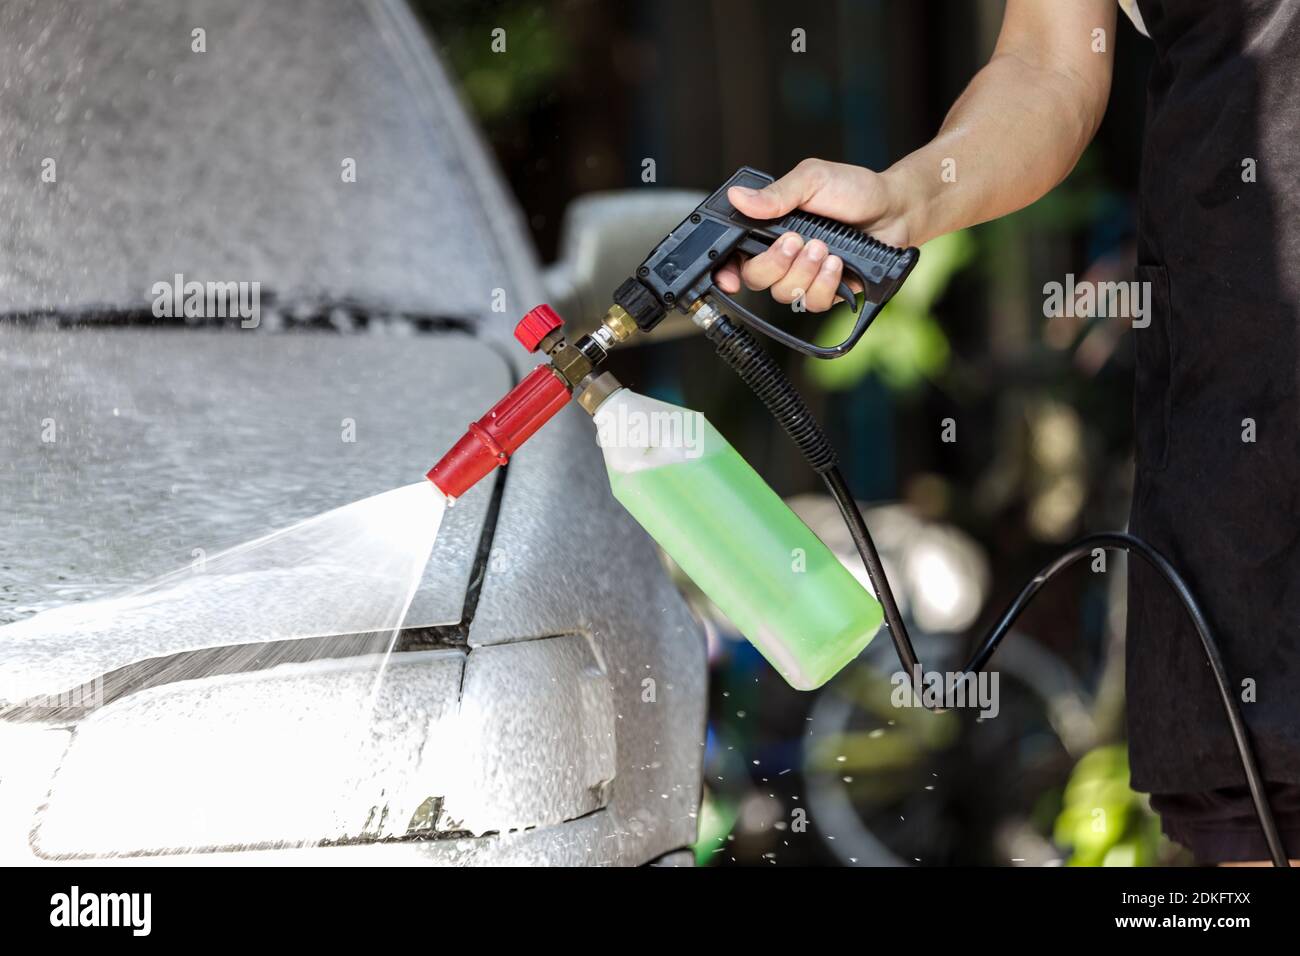 Car washing cleaning,Cleaning car using high pressure  spray foam Stock Photo